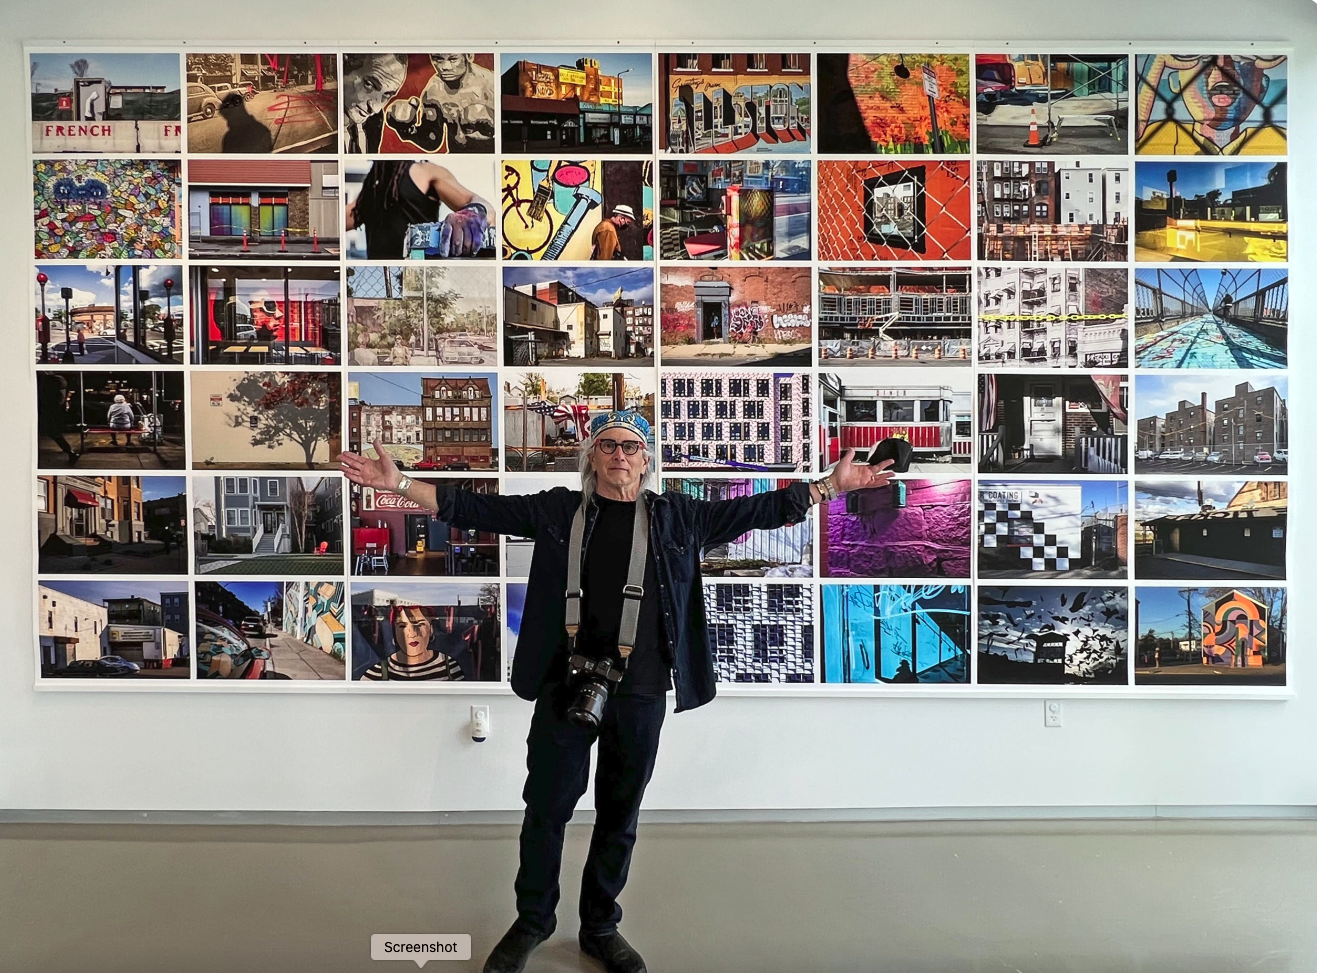 Edward Boche in front of wall of photos